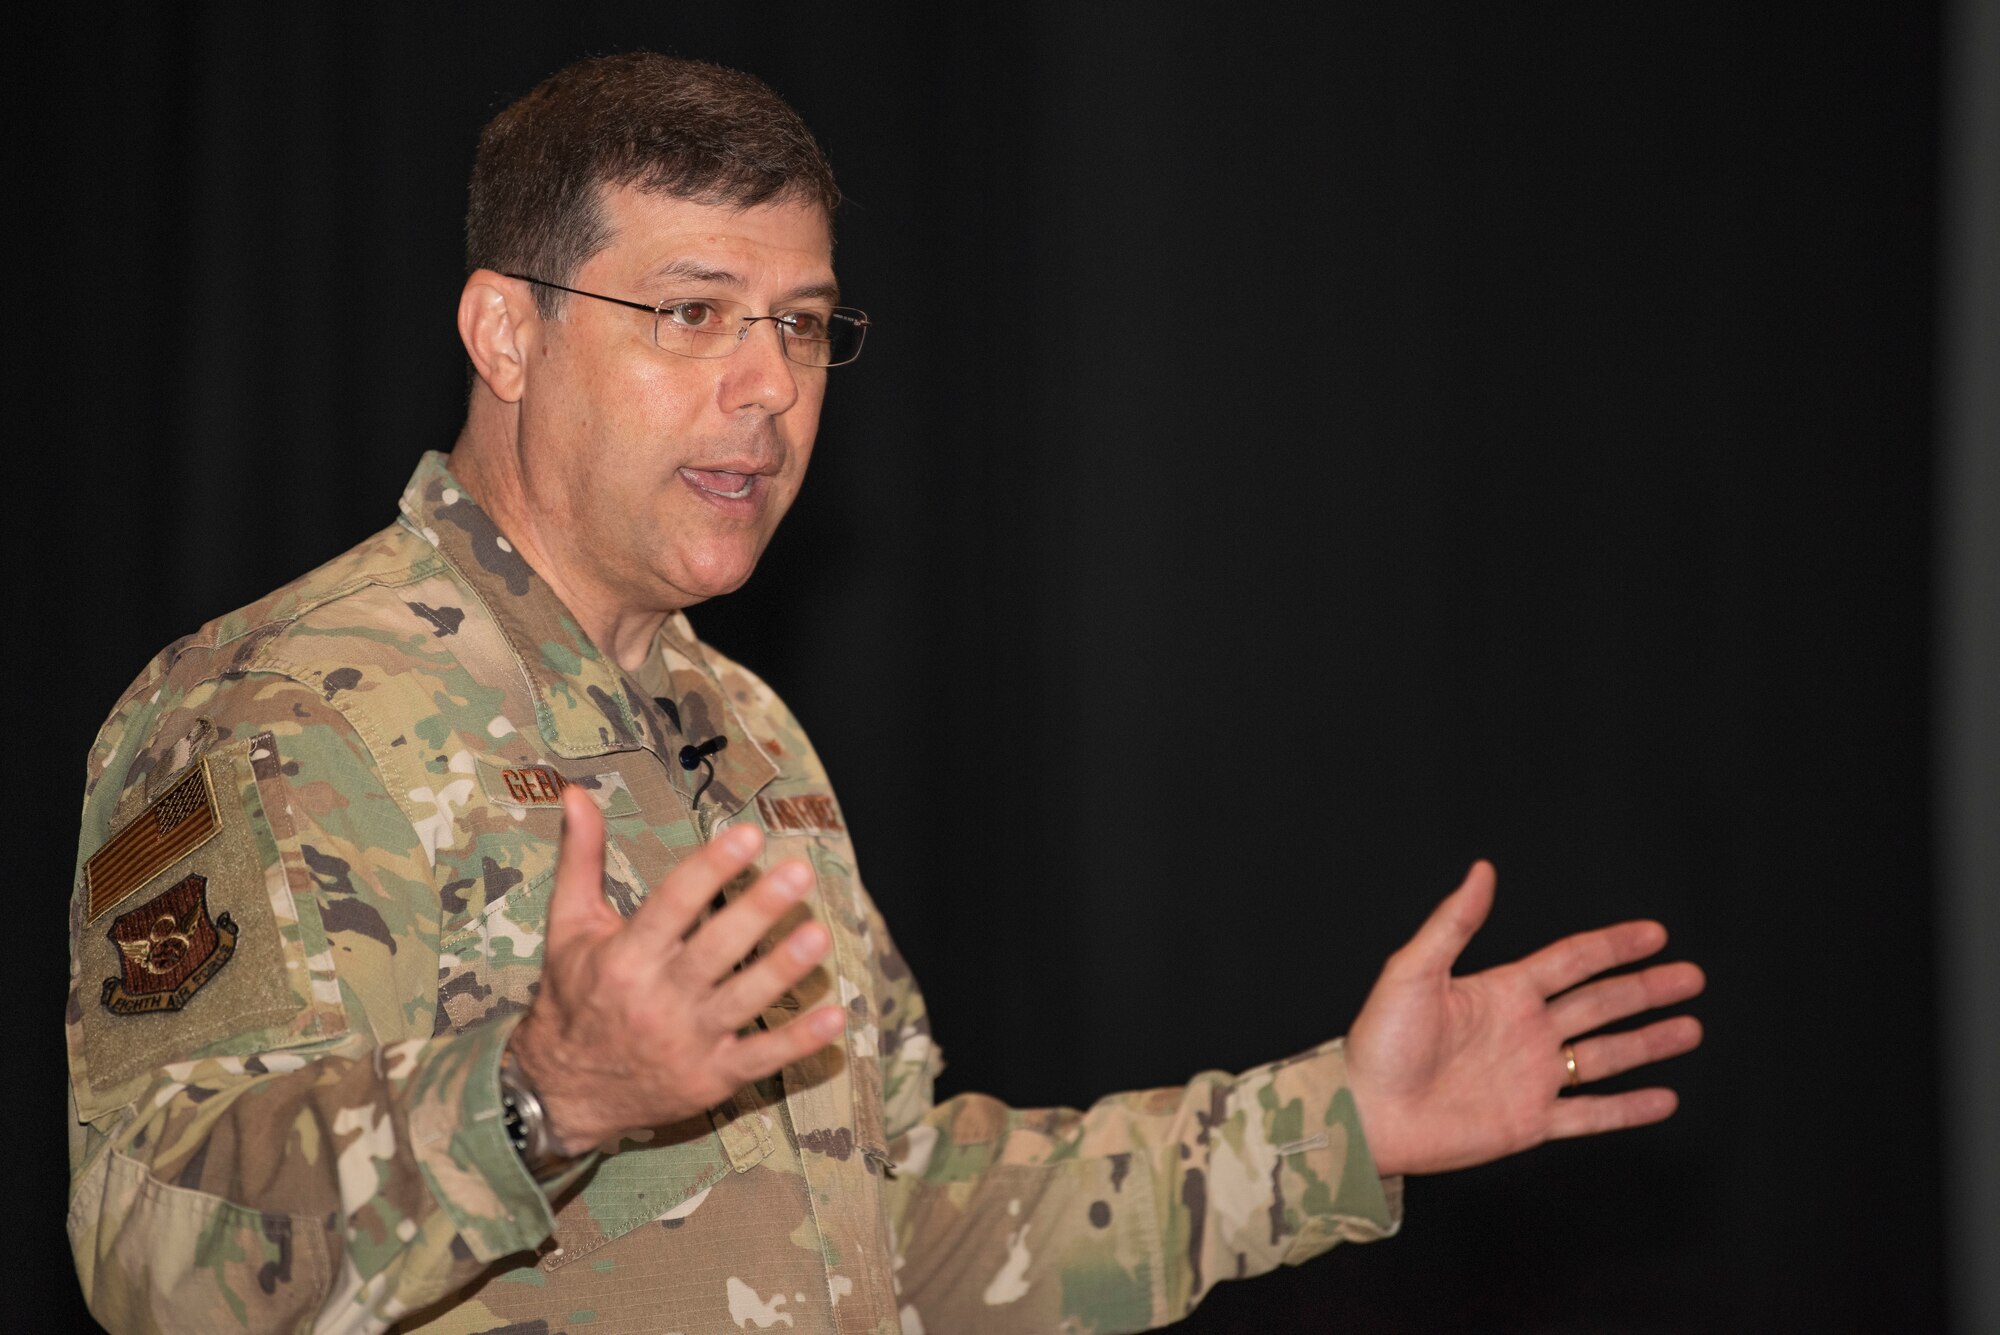 Maj. Gen. Andrew Gebara, 8th Air Force and Joint-Global Strike Operations Center commander, speaks to the 7th Bomb Wing during an all-call at Dyess Air Force Base, Texas, April 29, 2022. Gebara is responsible for the service’s bomber force and airborne nuclear command and control assets, encompassing approximately 21,000 Airmen across six installations. (U.S. Air Force photo by Airman 1st Class Ryan Hayman)